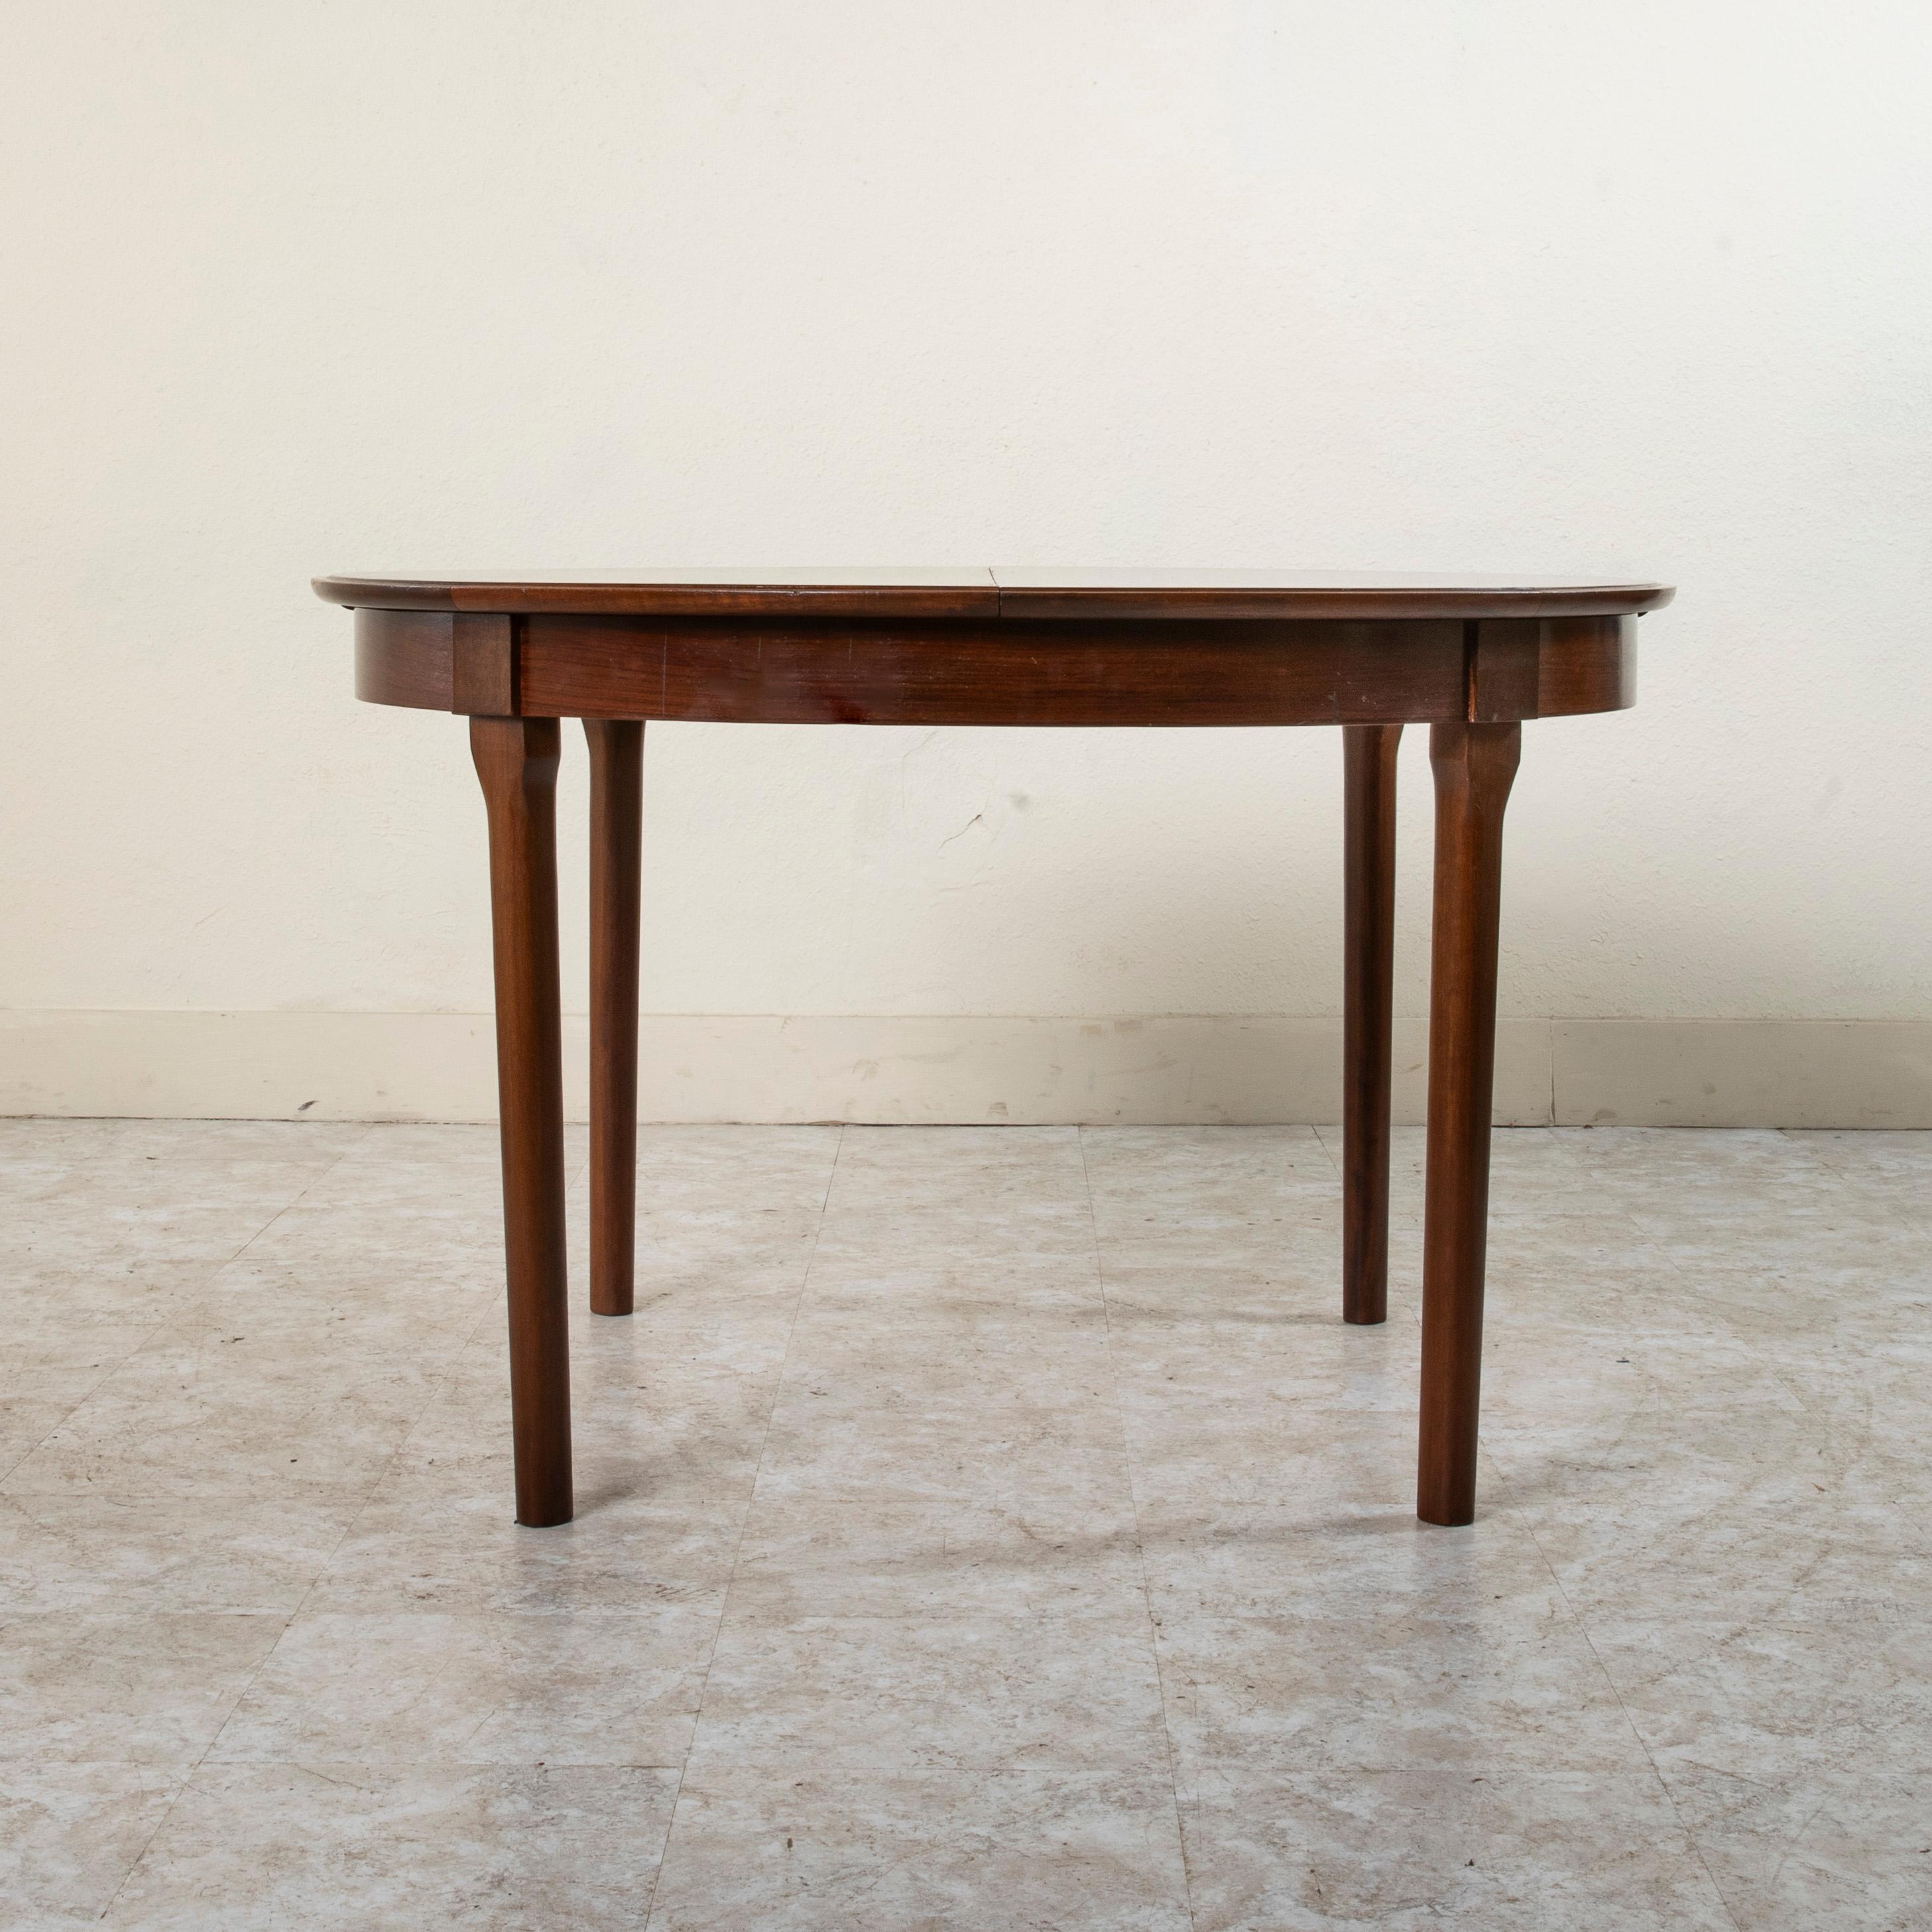 This Mid-Century Modern Danish dining table constructed of palisander or Brazilian rosewood features a 46.5 inch diameter top that rests on sleek tapered legs. The round top is divided in half and opens to allow access to its collapsible leaf. The